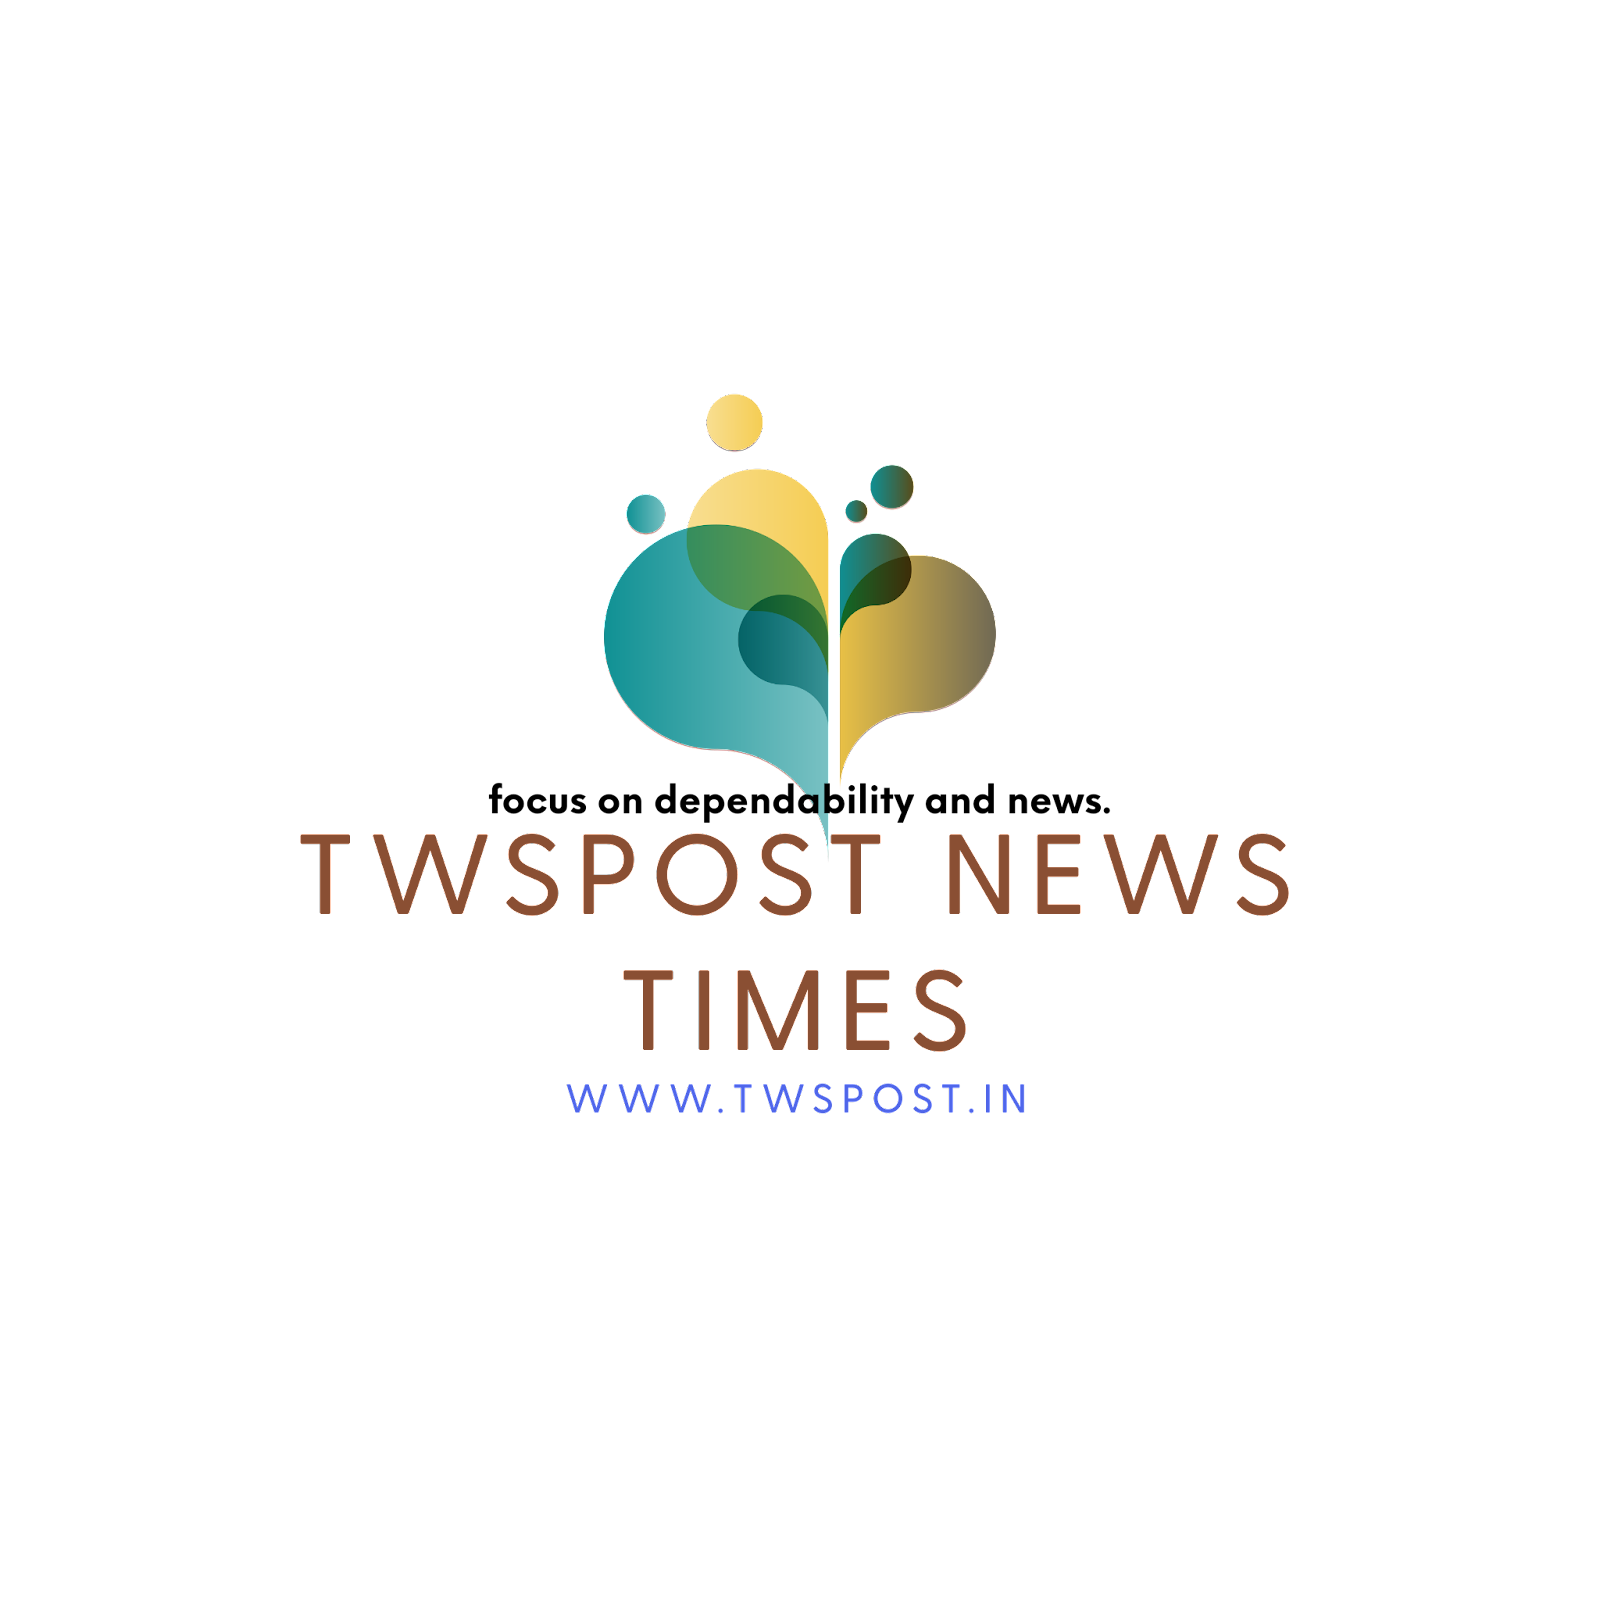 Twspost News Times